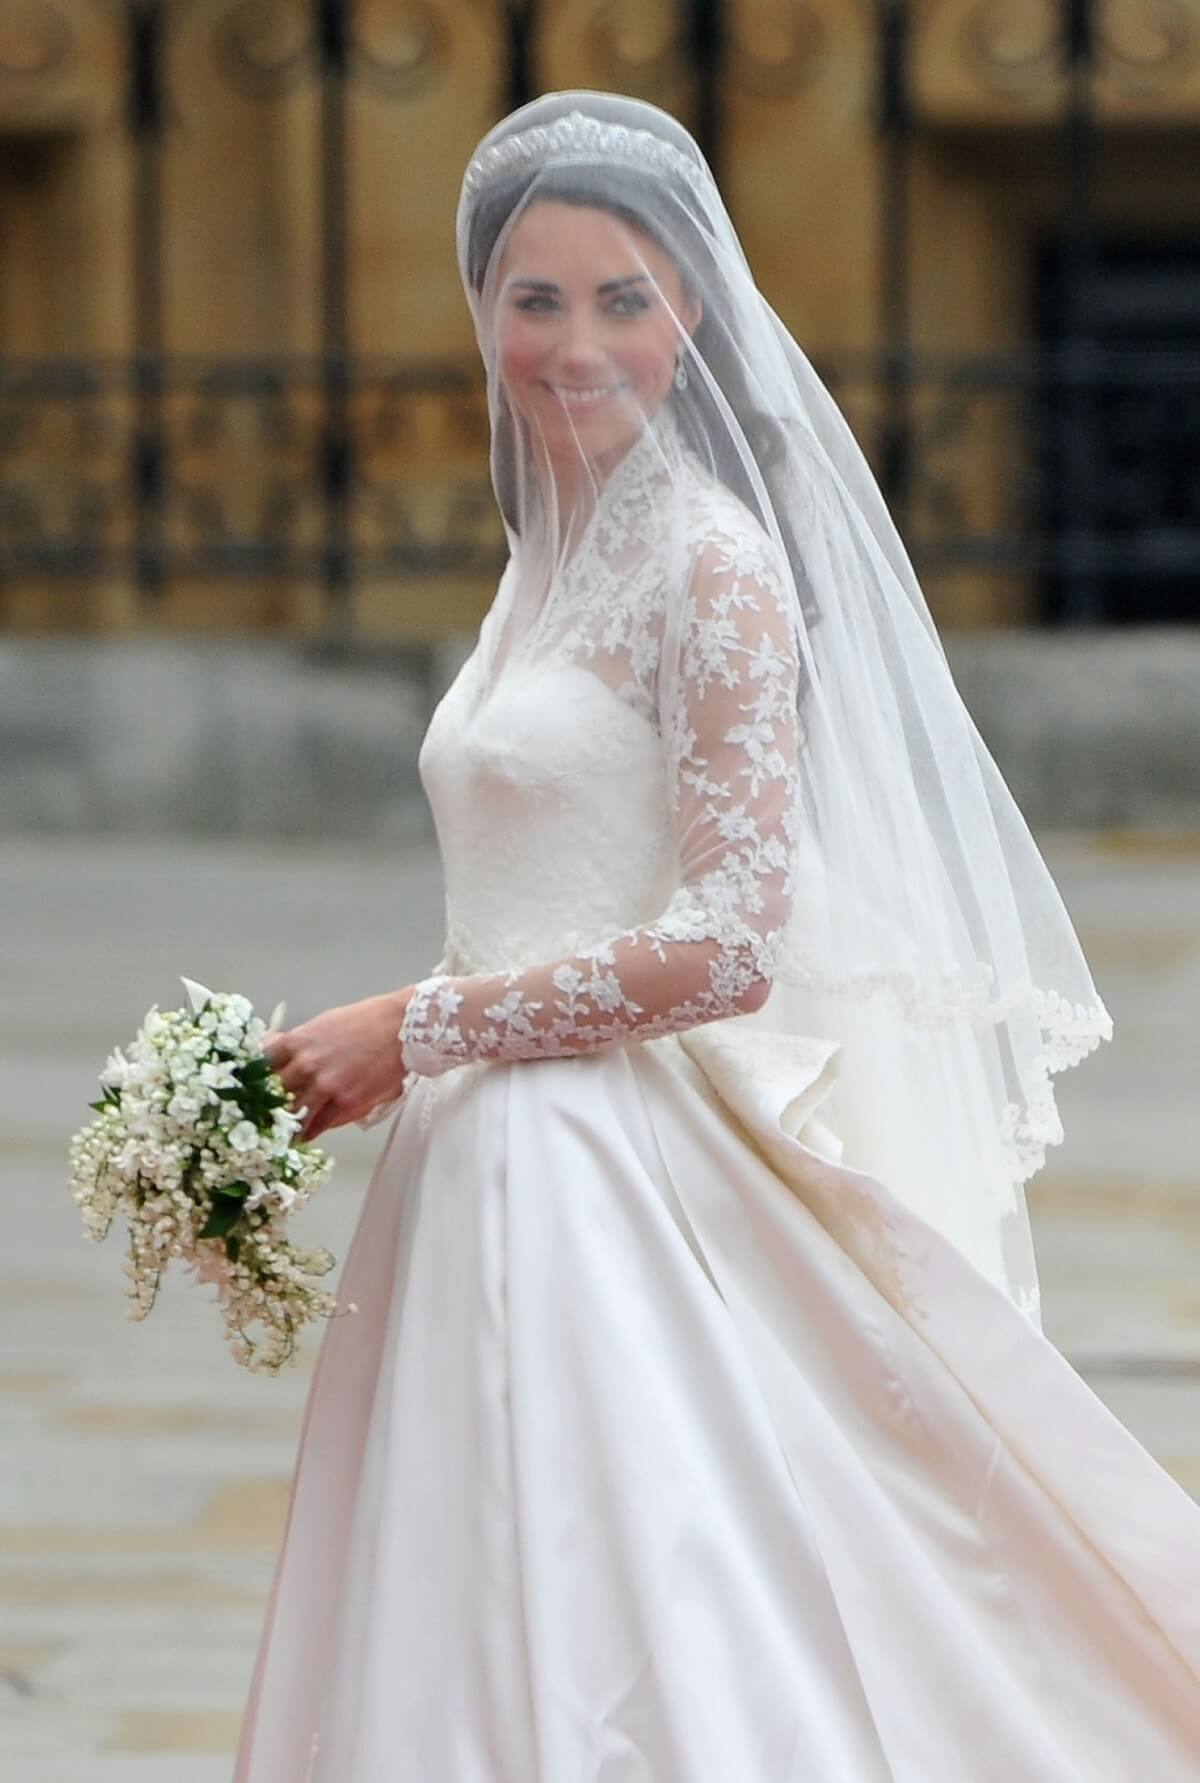 Kate Middleton as she arrives at Westminster Abbey for her wedding to Prince William